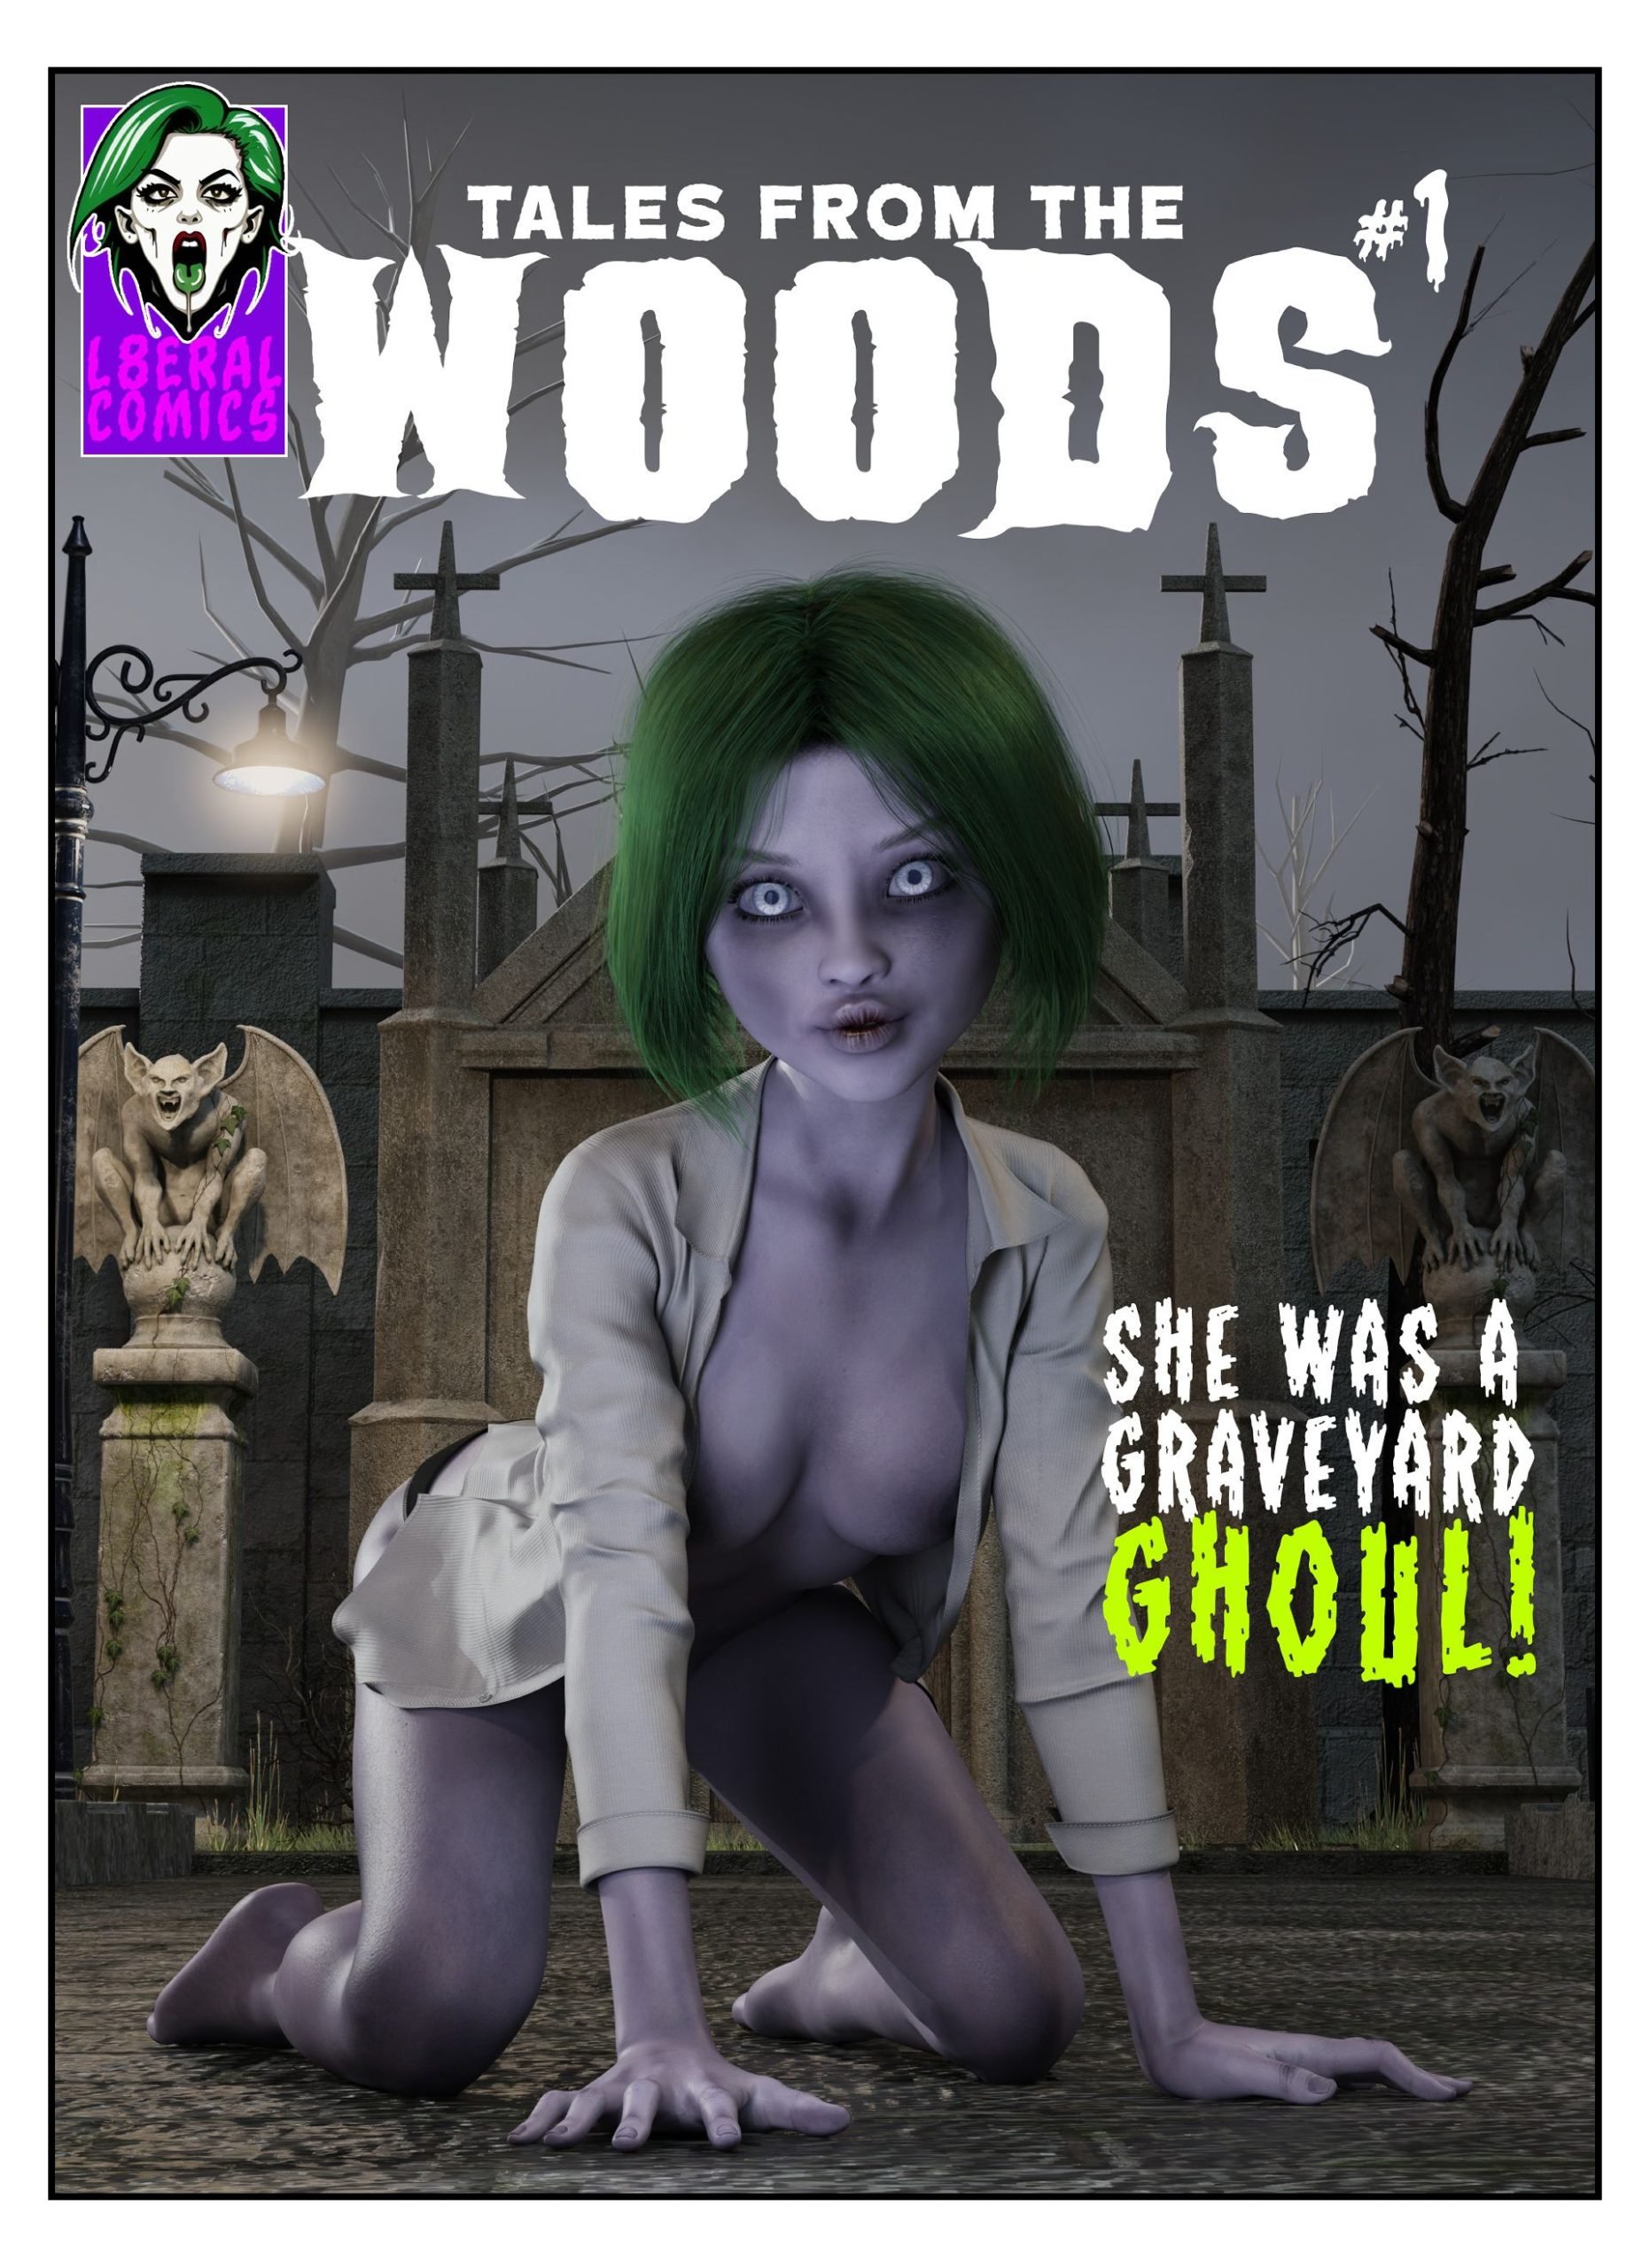 Tales From The Woods L8ERAL Porn Comic pic image